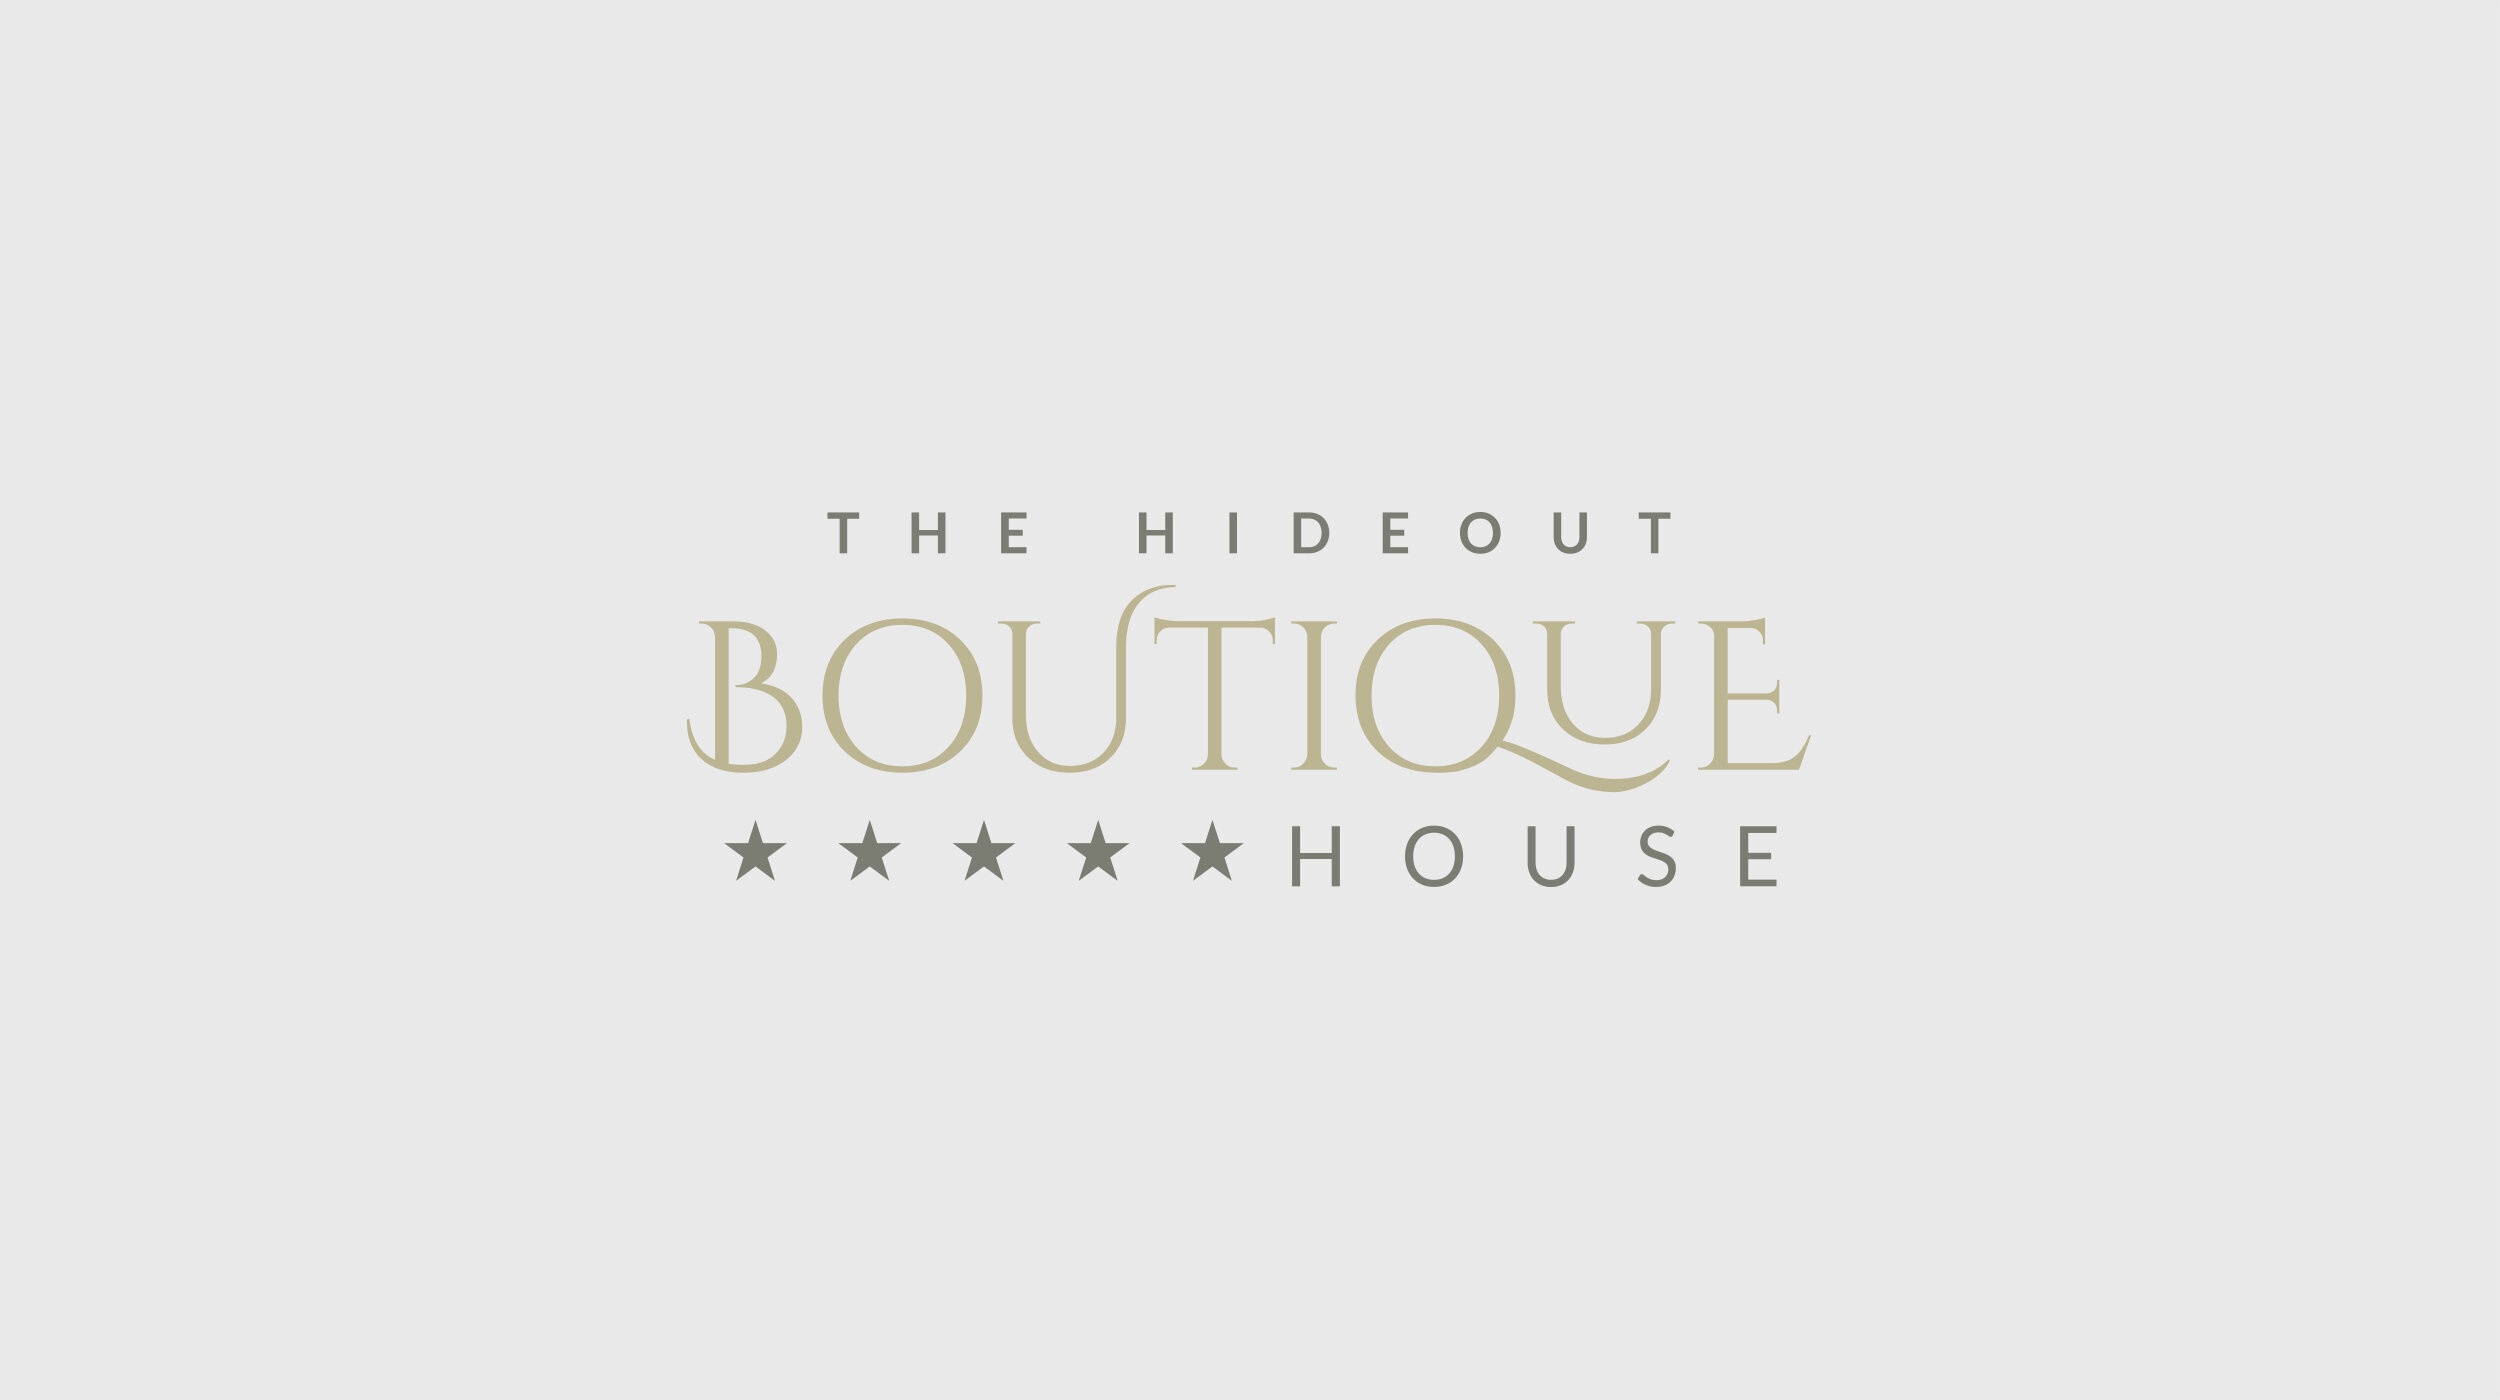 brand-strategy-design-the-hideout-boutique-house-adam-thorp-13.jpeg